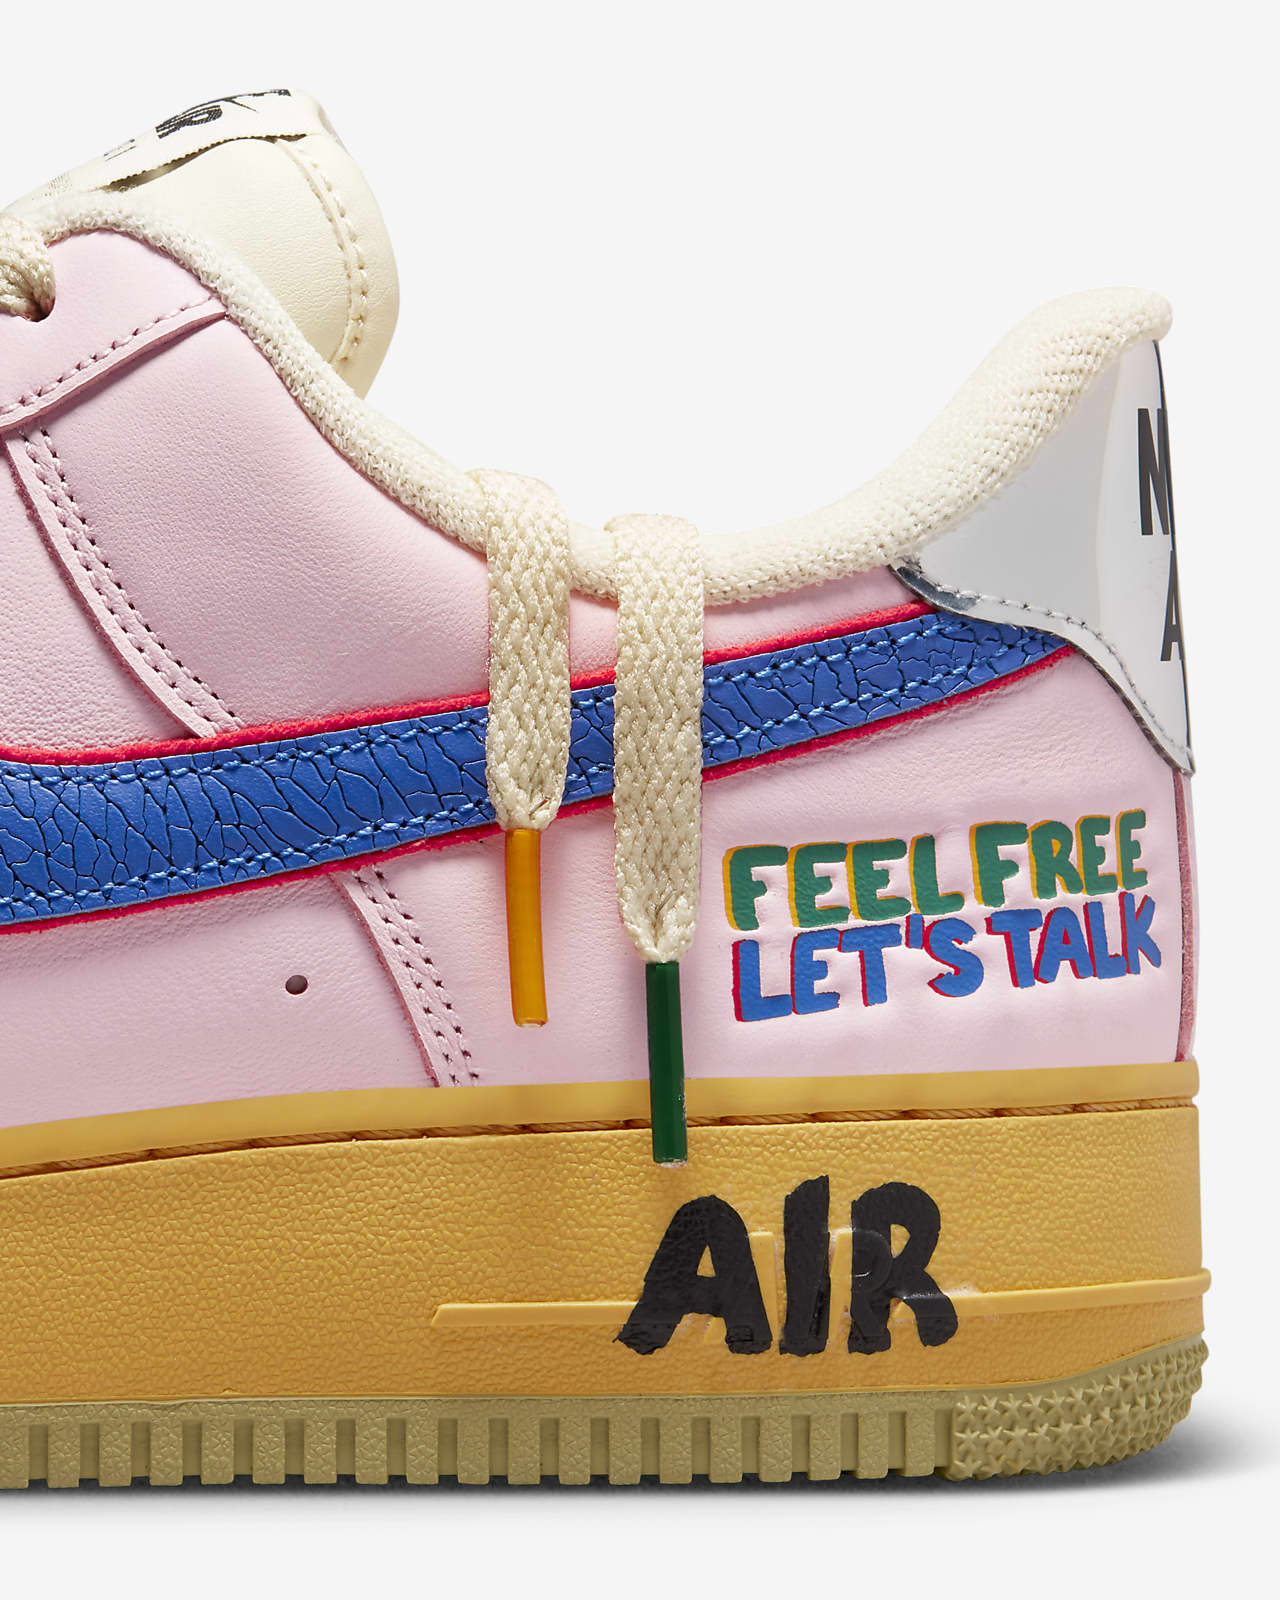 nike air force 1 low 07 feel free let's talk